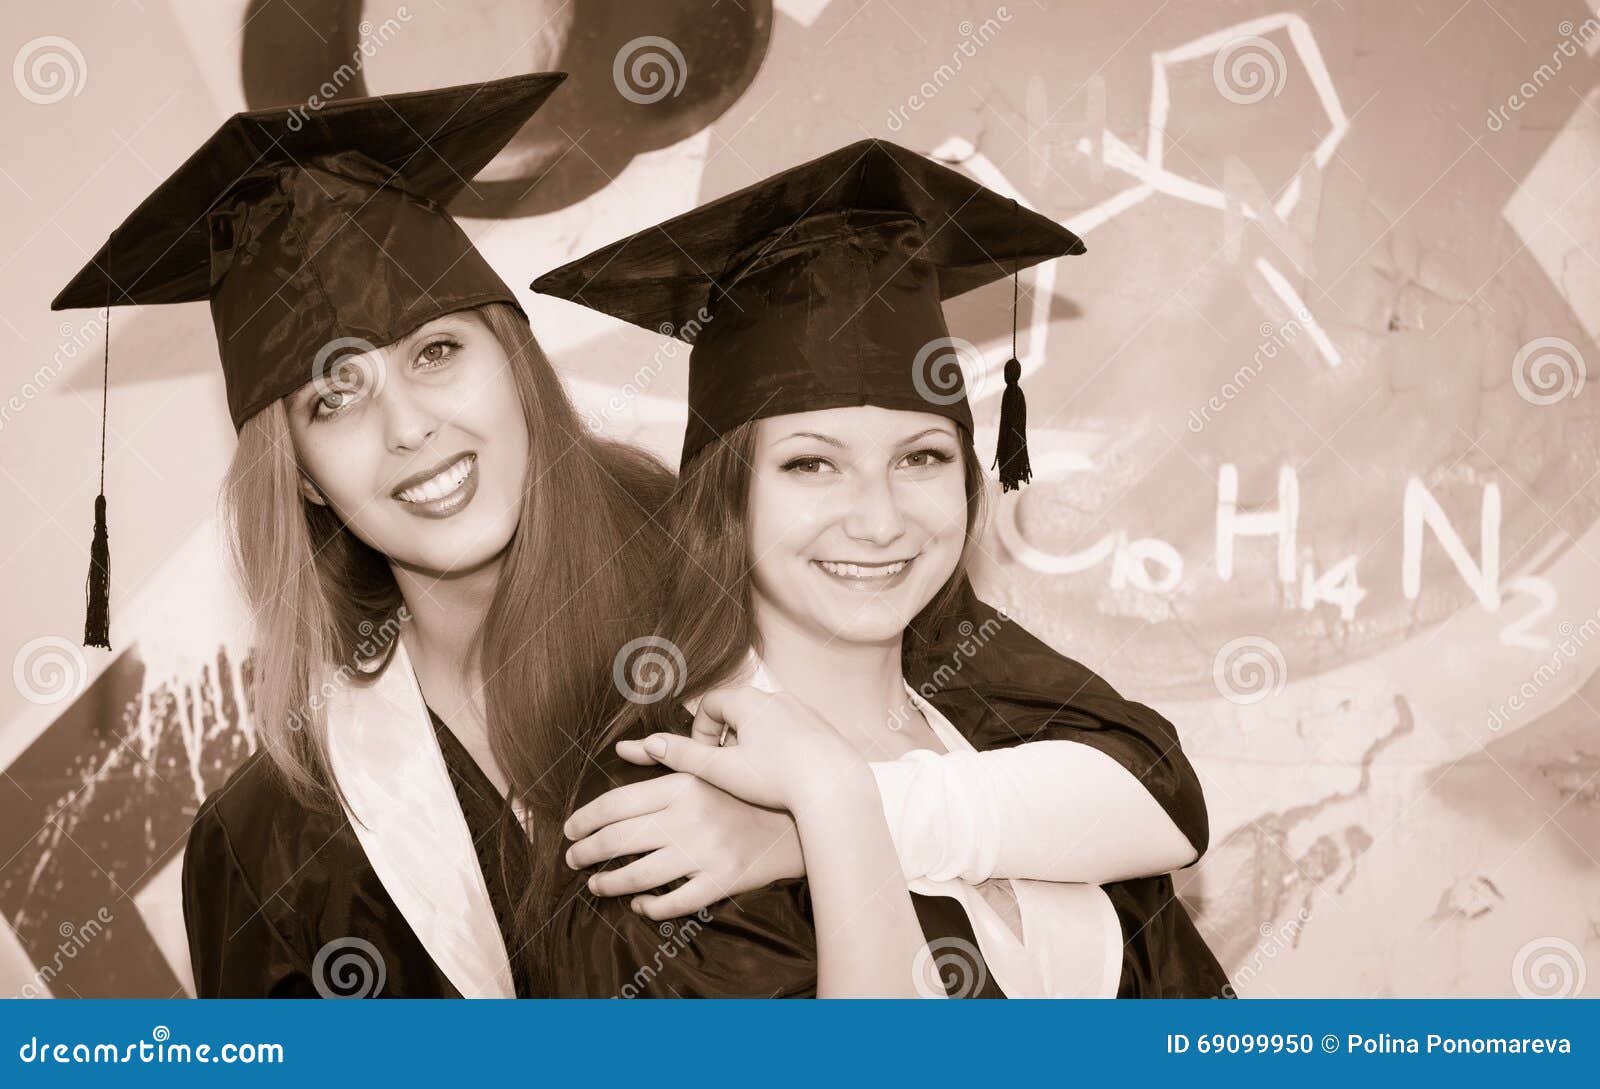 Colorado Graduation Pictures | Cap and Gown Photography Session